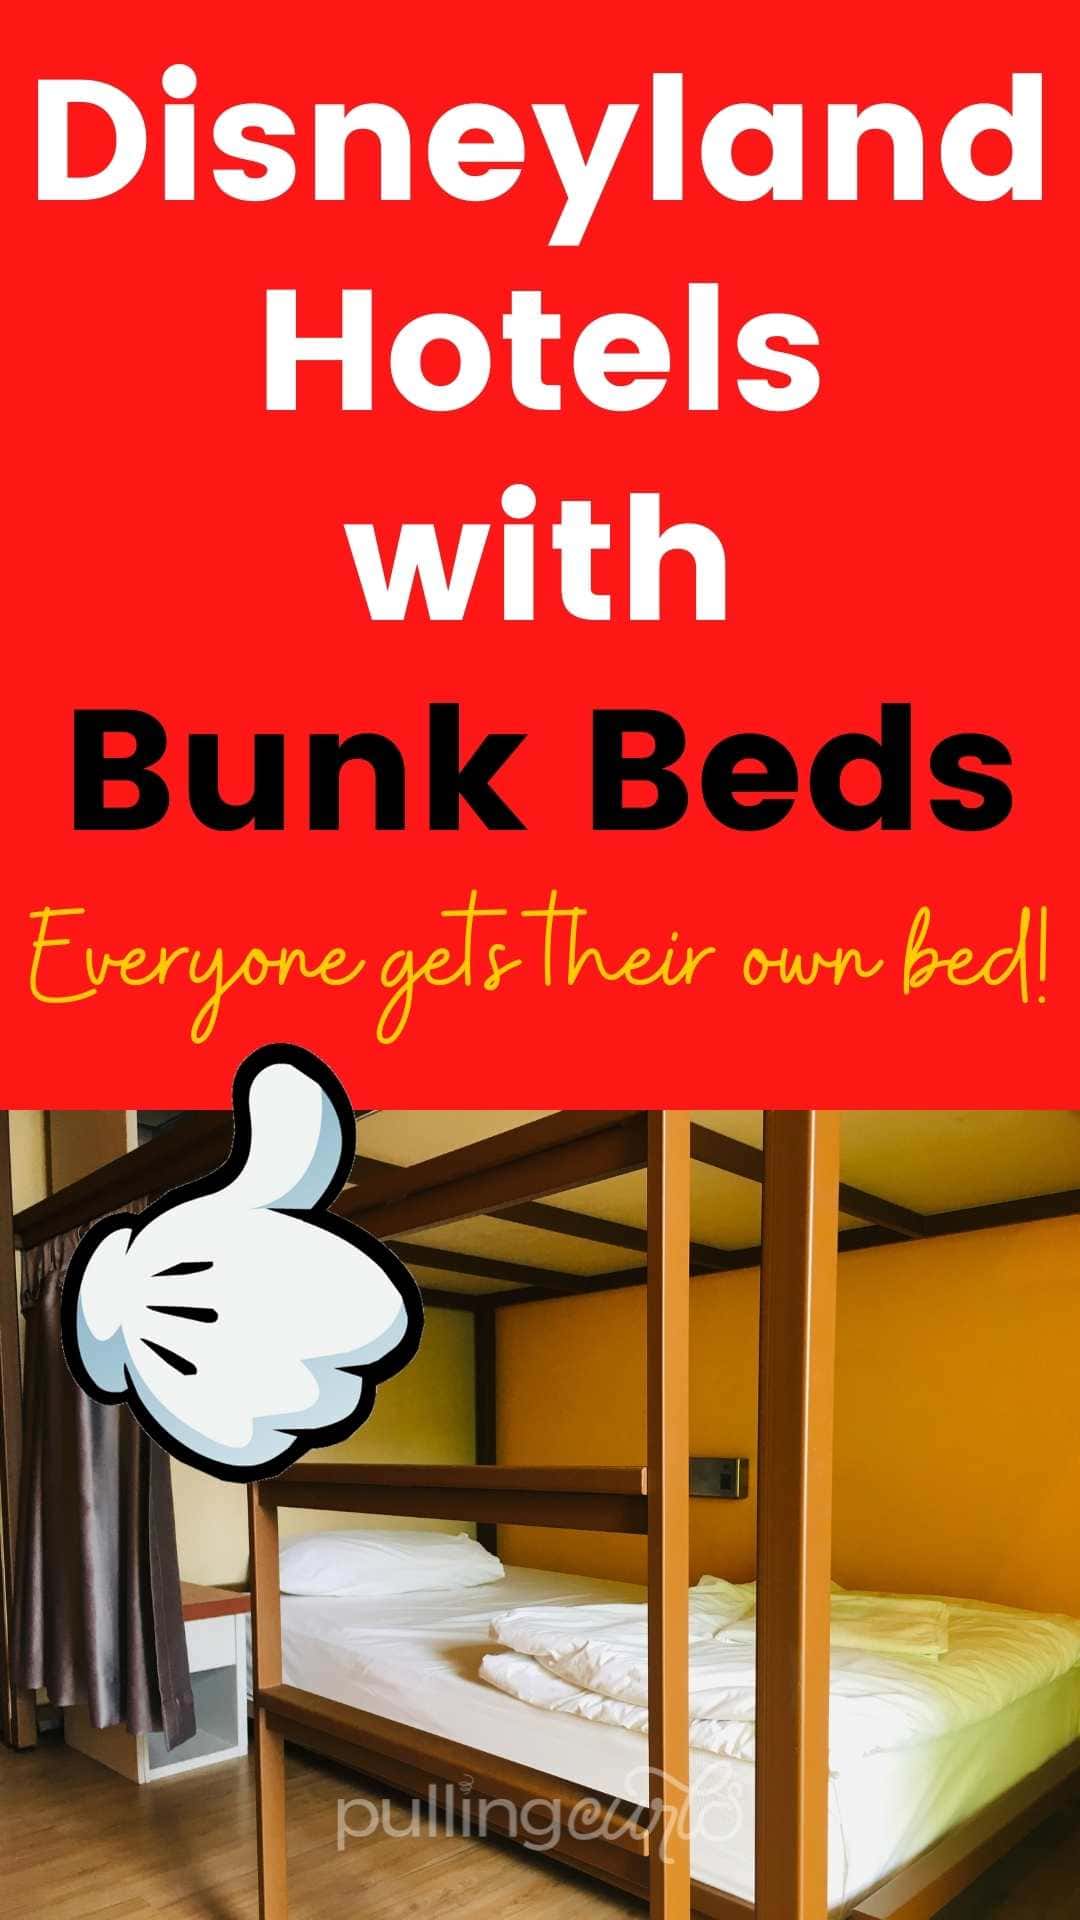 Looking for each kid to have their own beds when you go to Disneyland? There are a few hotels close to Disneyland that have bunk beds. Today I'll share those as well as some of the pro's and con's of each hotel chain so you can pick the best one for you! via @pullingcurls